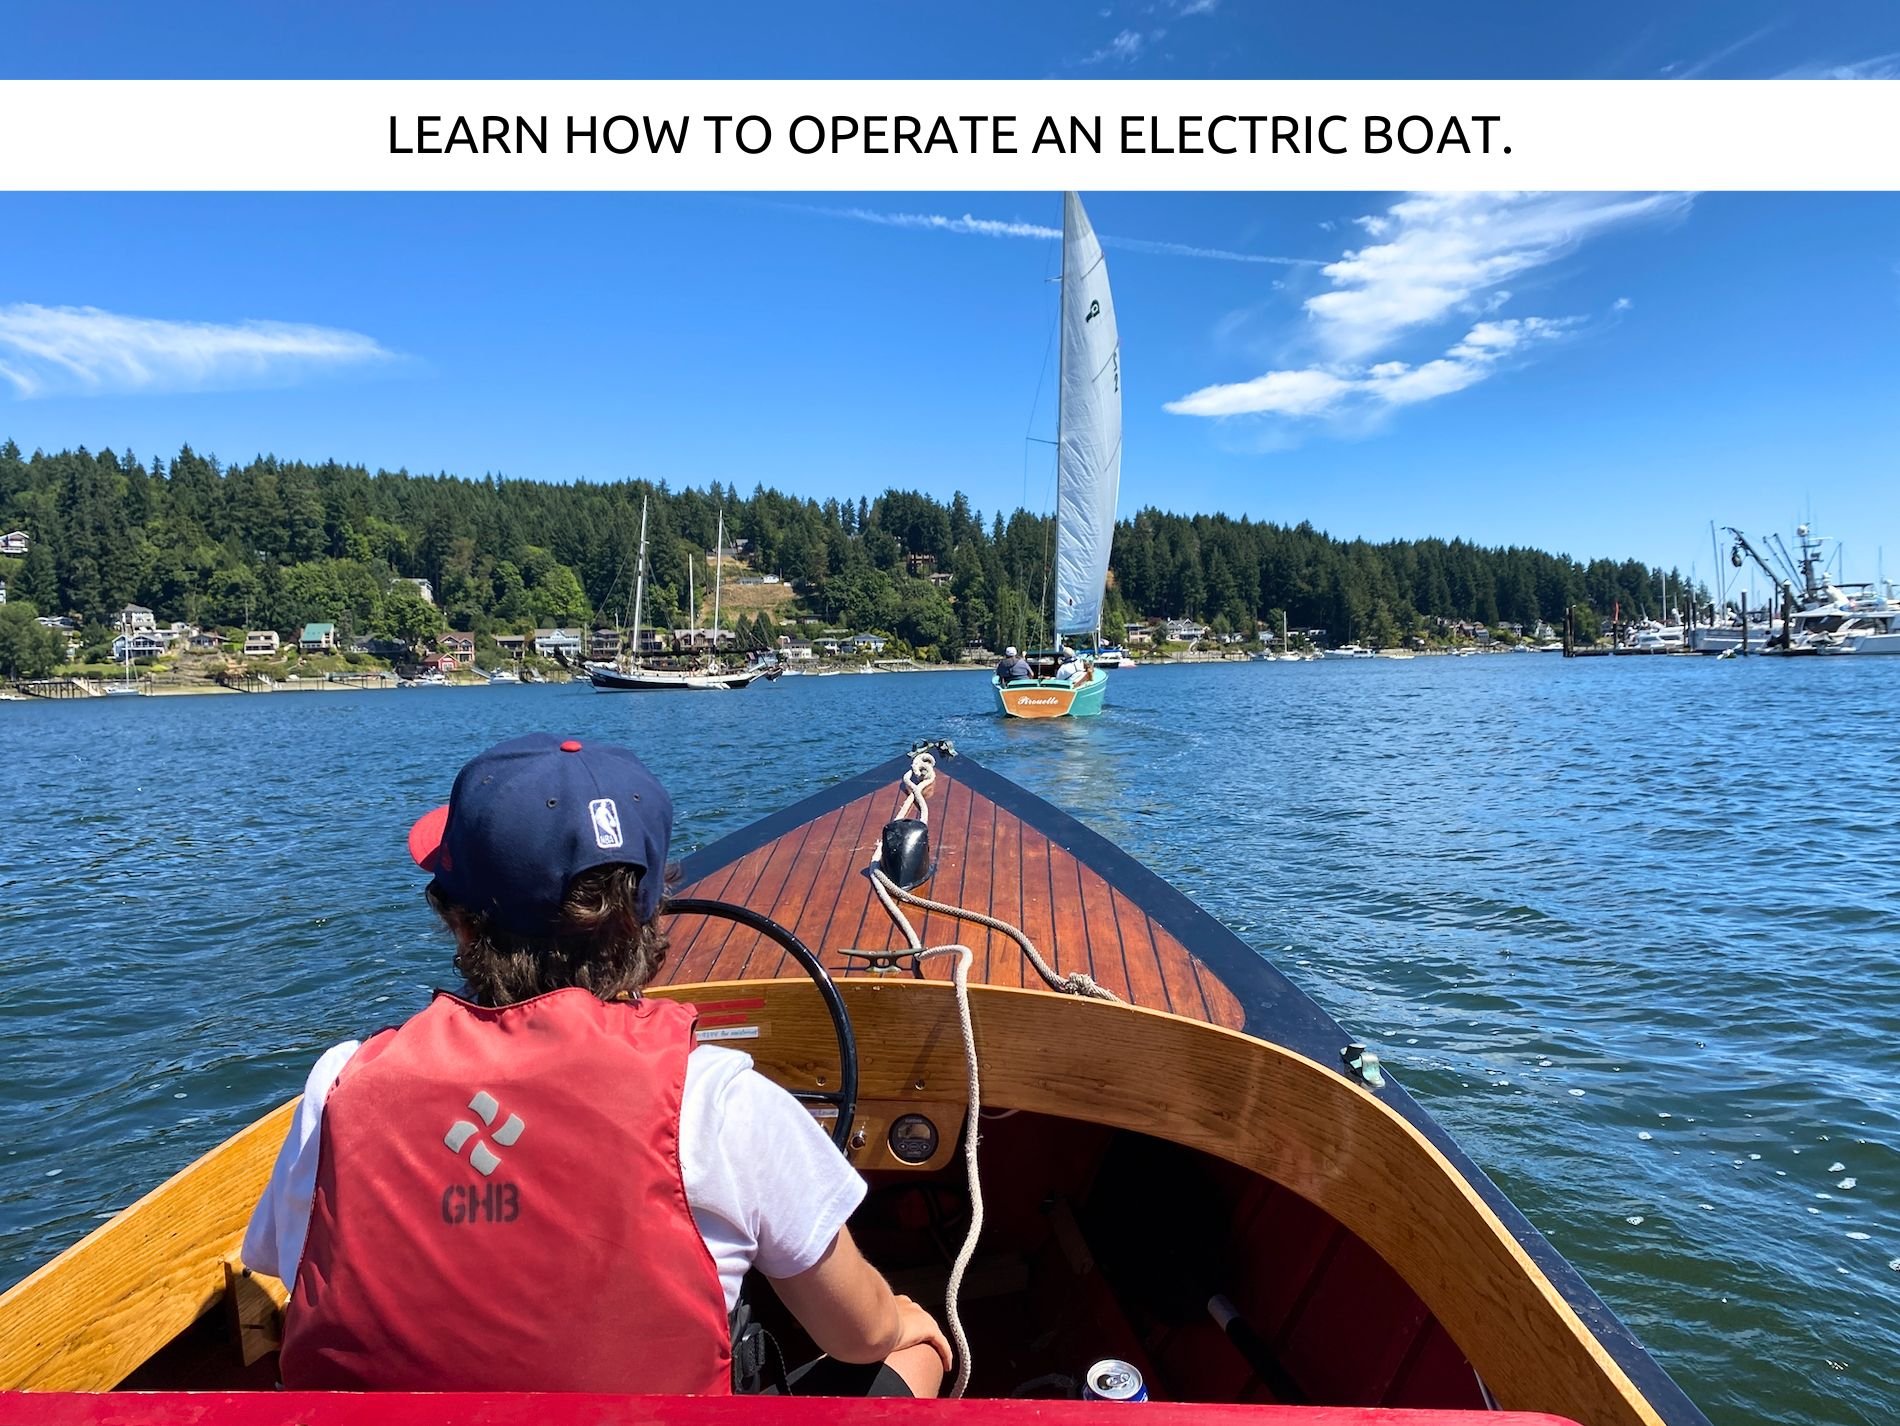 AAASC23-Exploring the Harbor in electric boats and basics of keel-boat sailing aboard Thunderbird No. 1, Pirouette (2).jpg